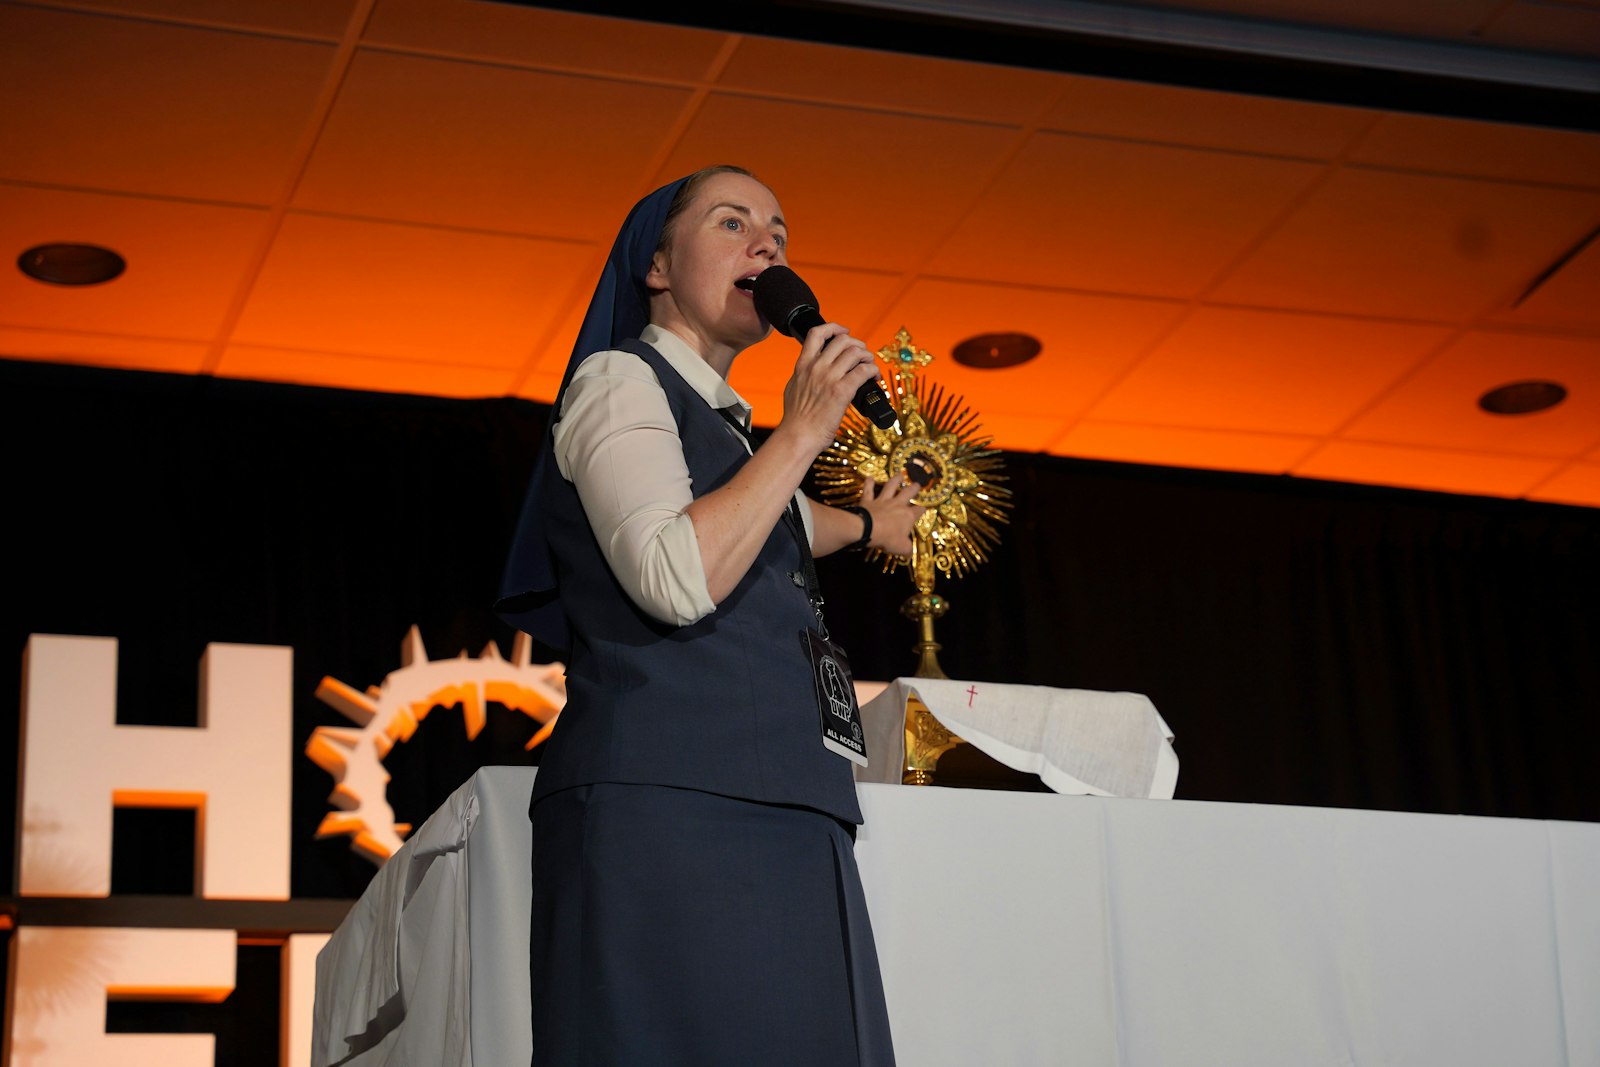 Sr. Tracey Matthia Dugas, FSP, speaks during the Holy Fire conference. Sr. Tracey invited two conference-goers to play a game of “Bible verse: Saint or Kanye?” in which a quote appeared on screen and the contestants guessed who said it.